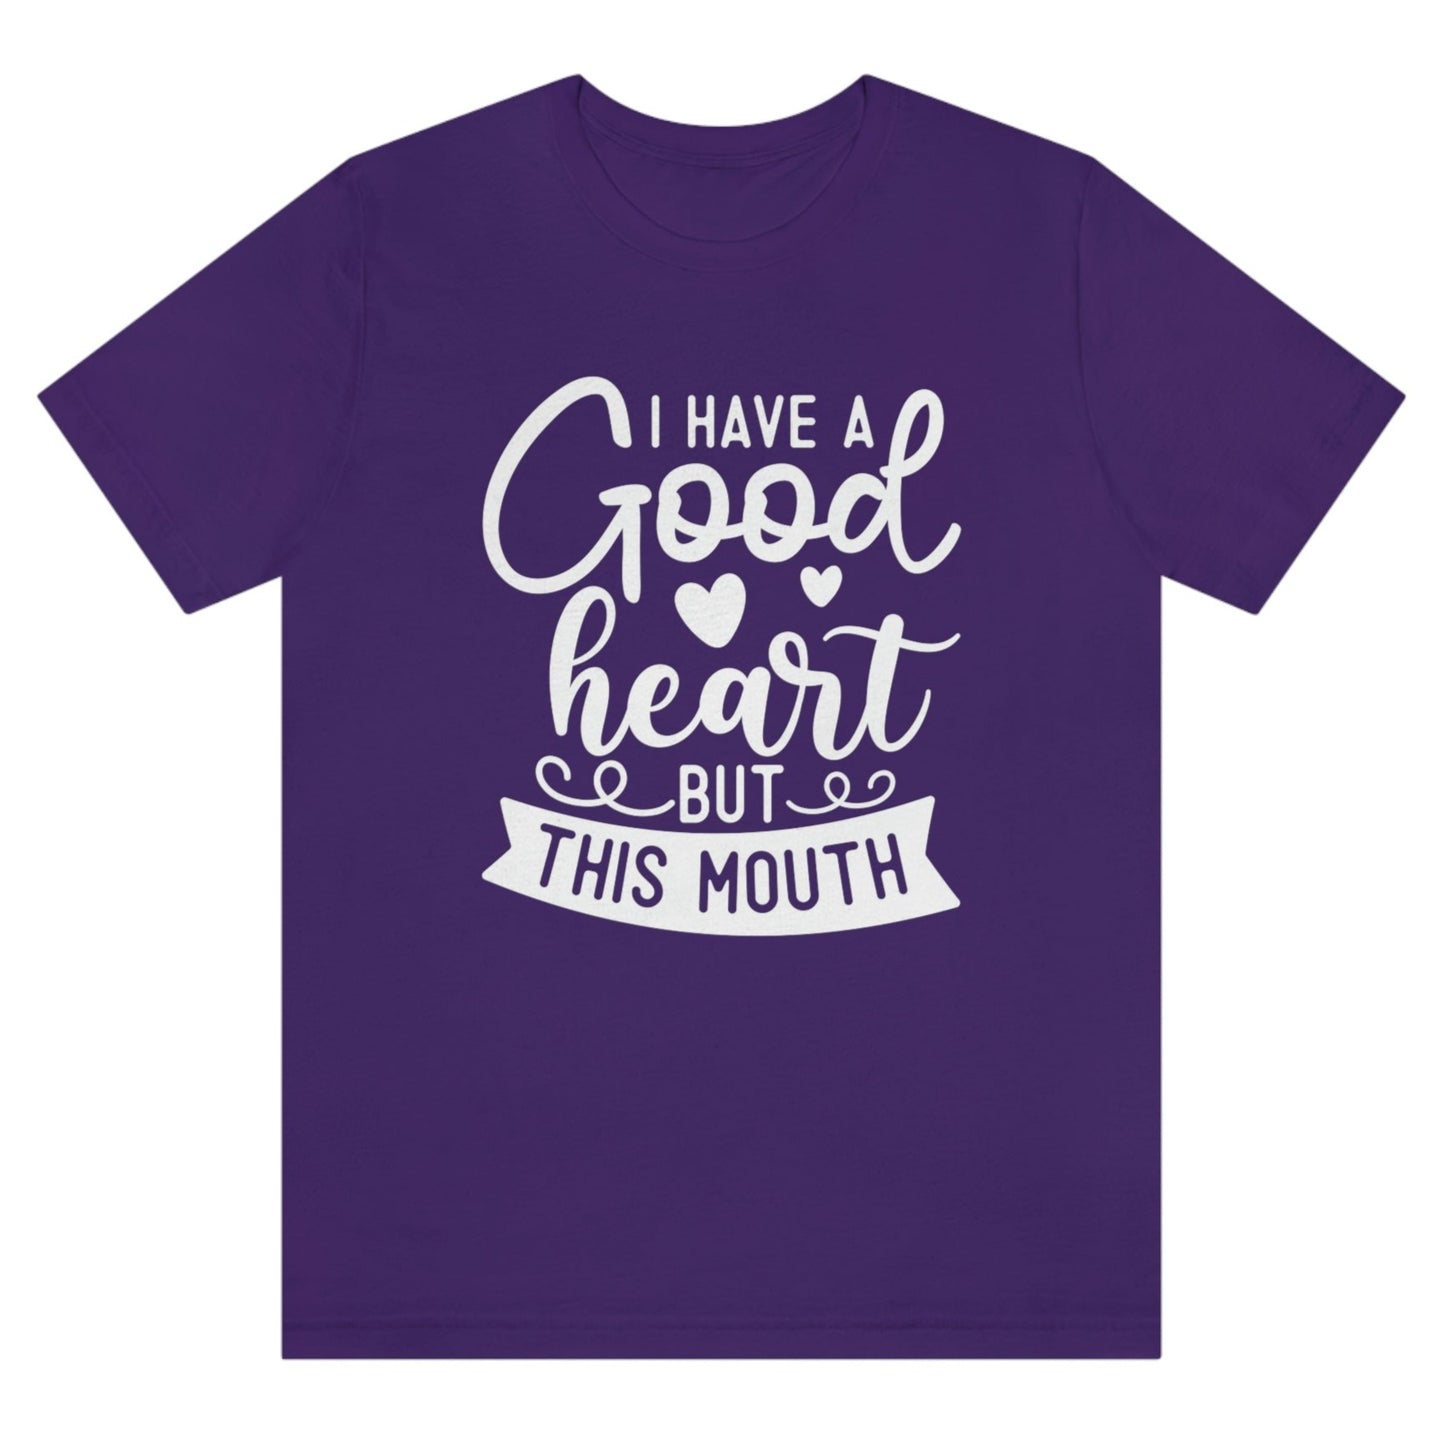 i-have-a-good-heart-but-this-mouth-team-purple-t-shirt-women-sarcastic-funny